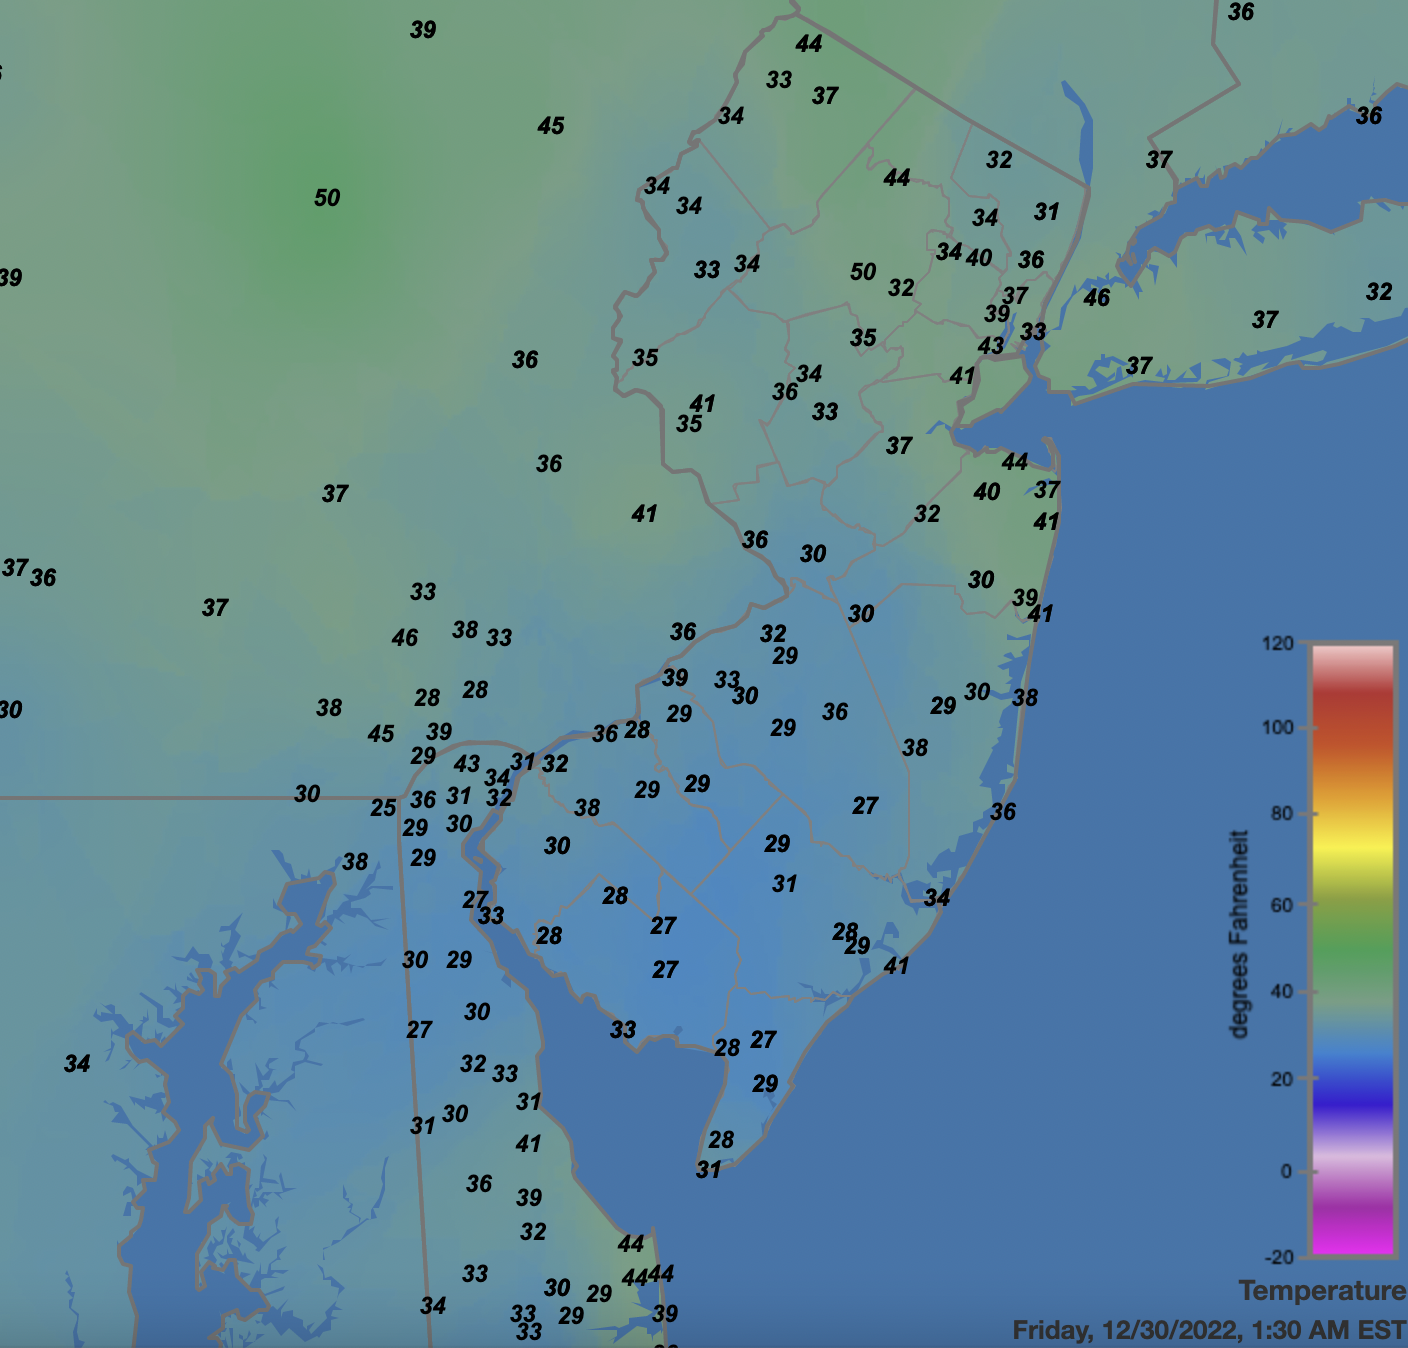 Surface air temperatures across NJ and nearby states at 1:30 AM on December 30th.